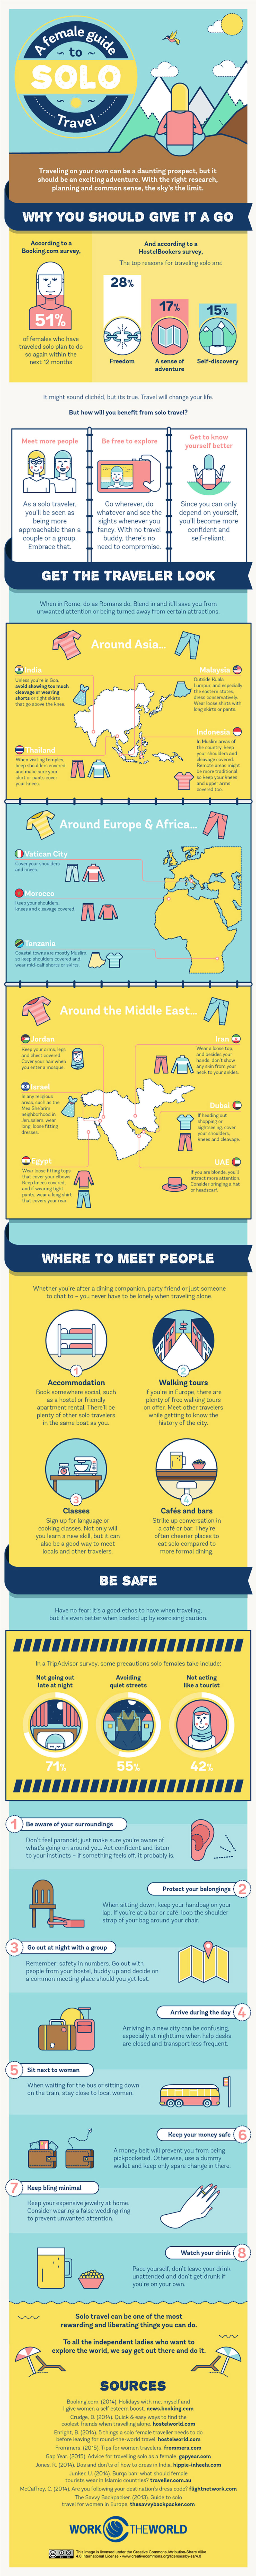 Solo Travel Guide for Women Infographic